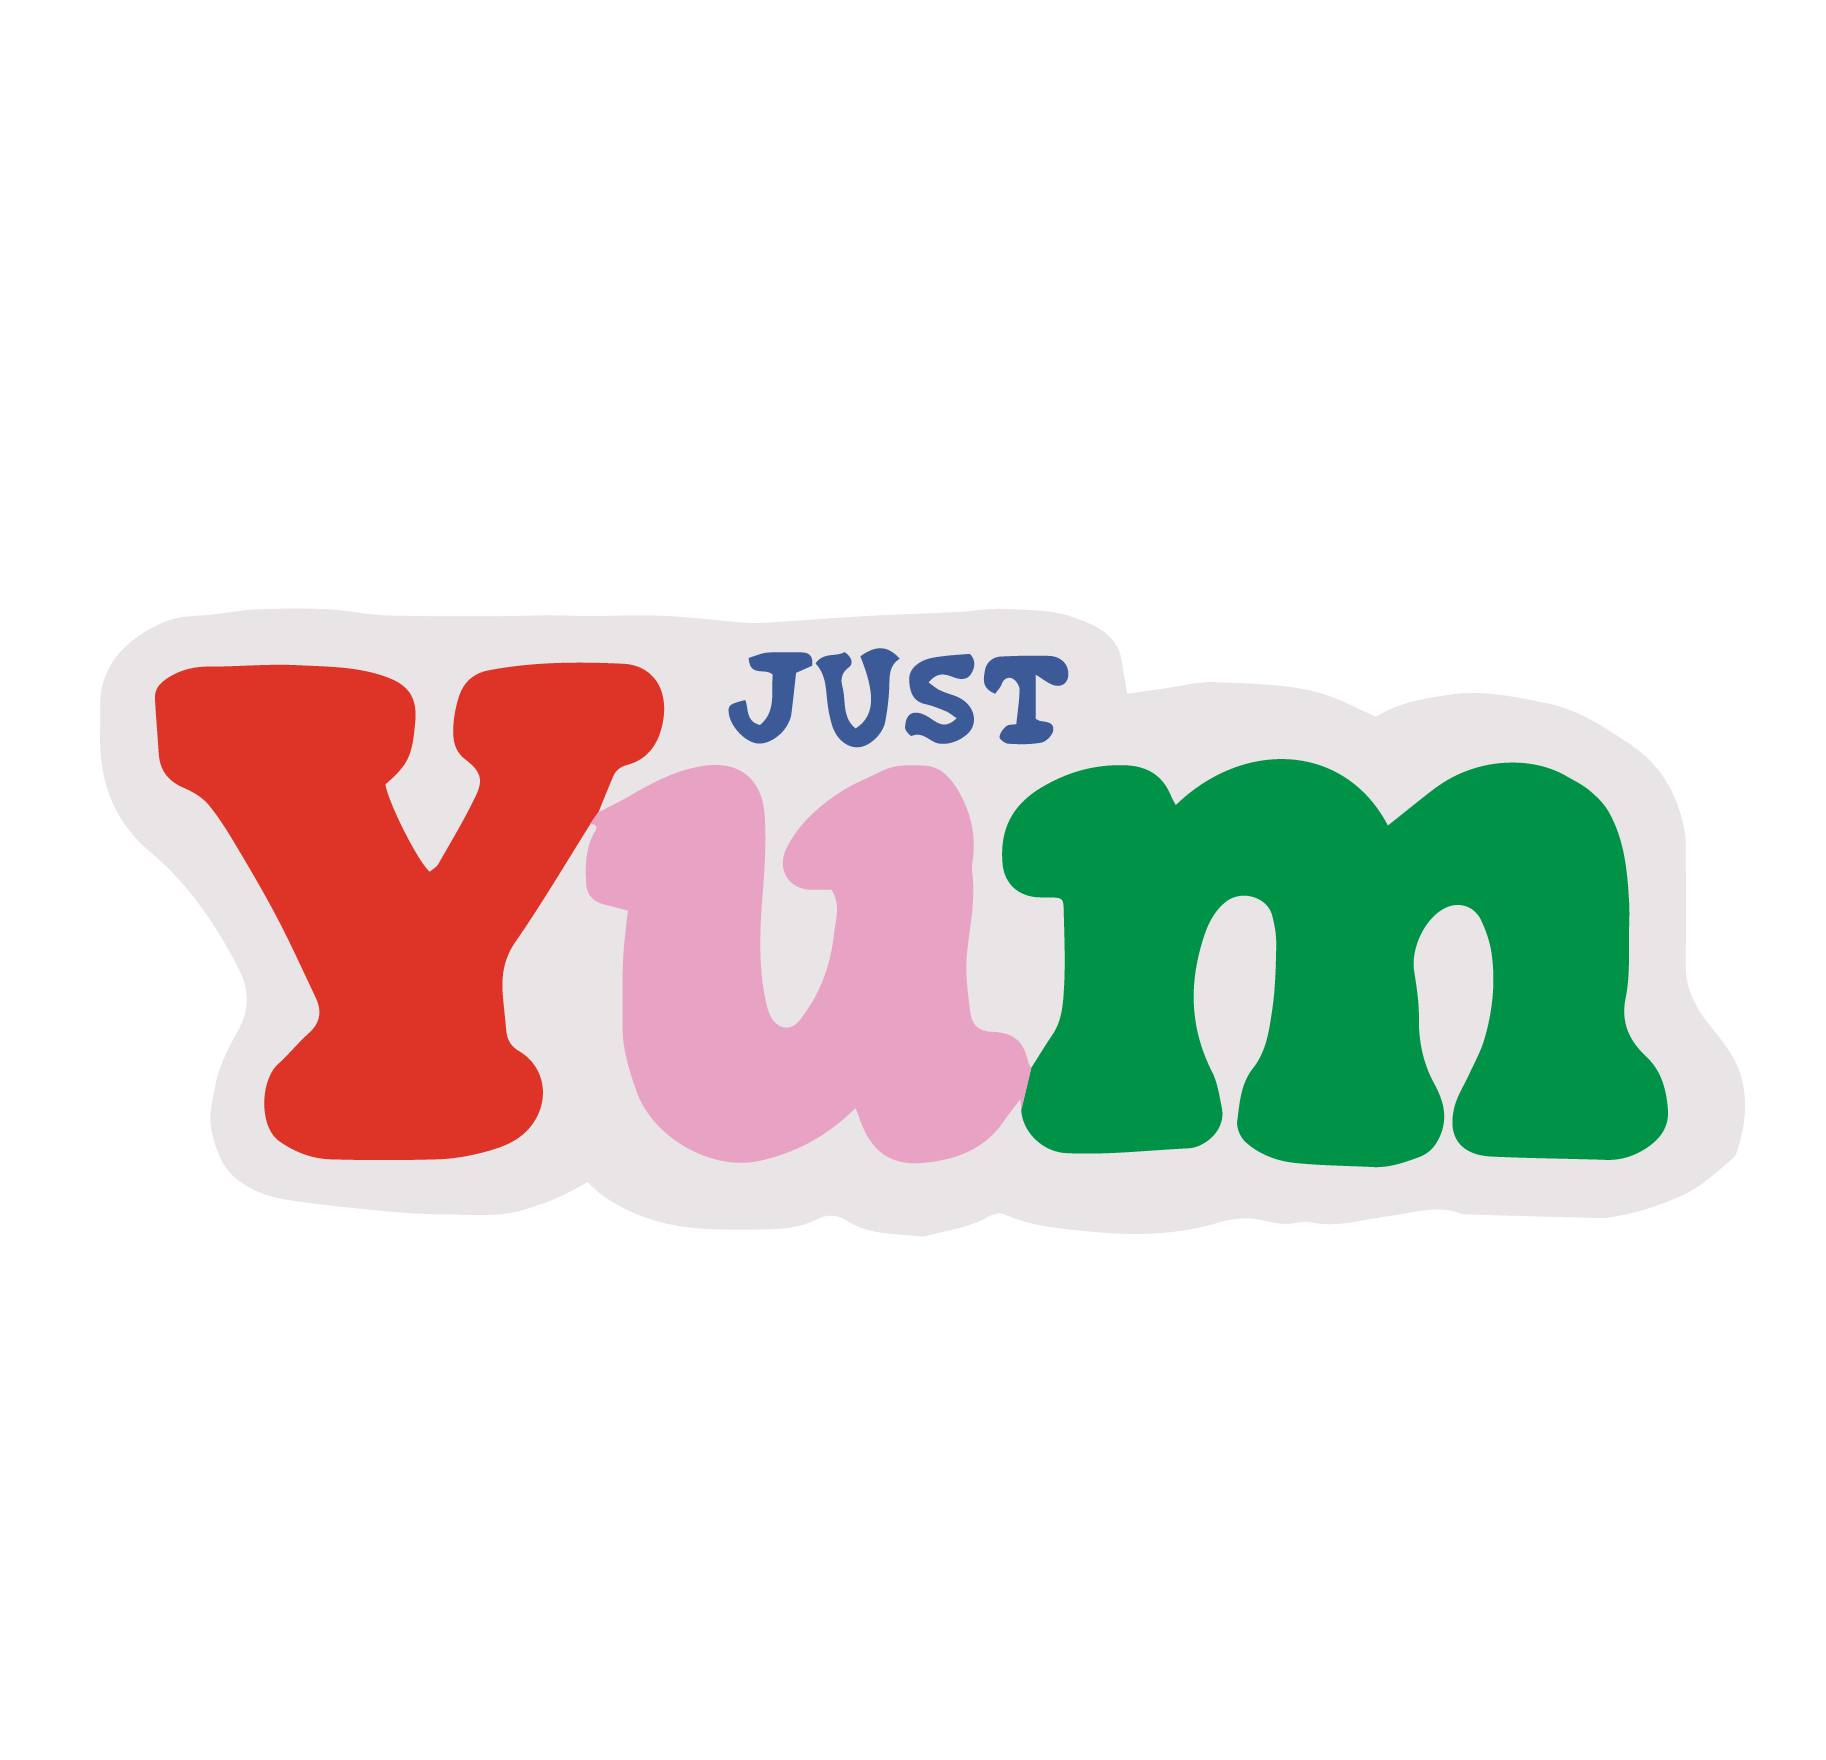 Just Yum sticker. Font is colorful, using blue, red, pink, and green.